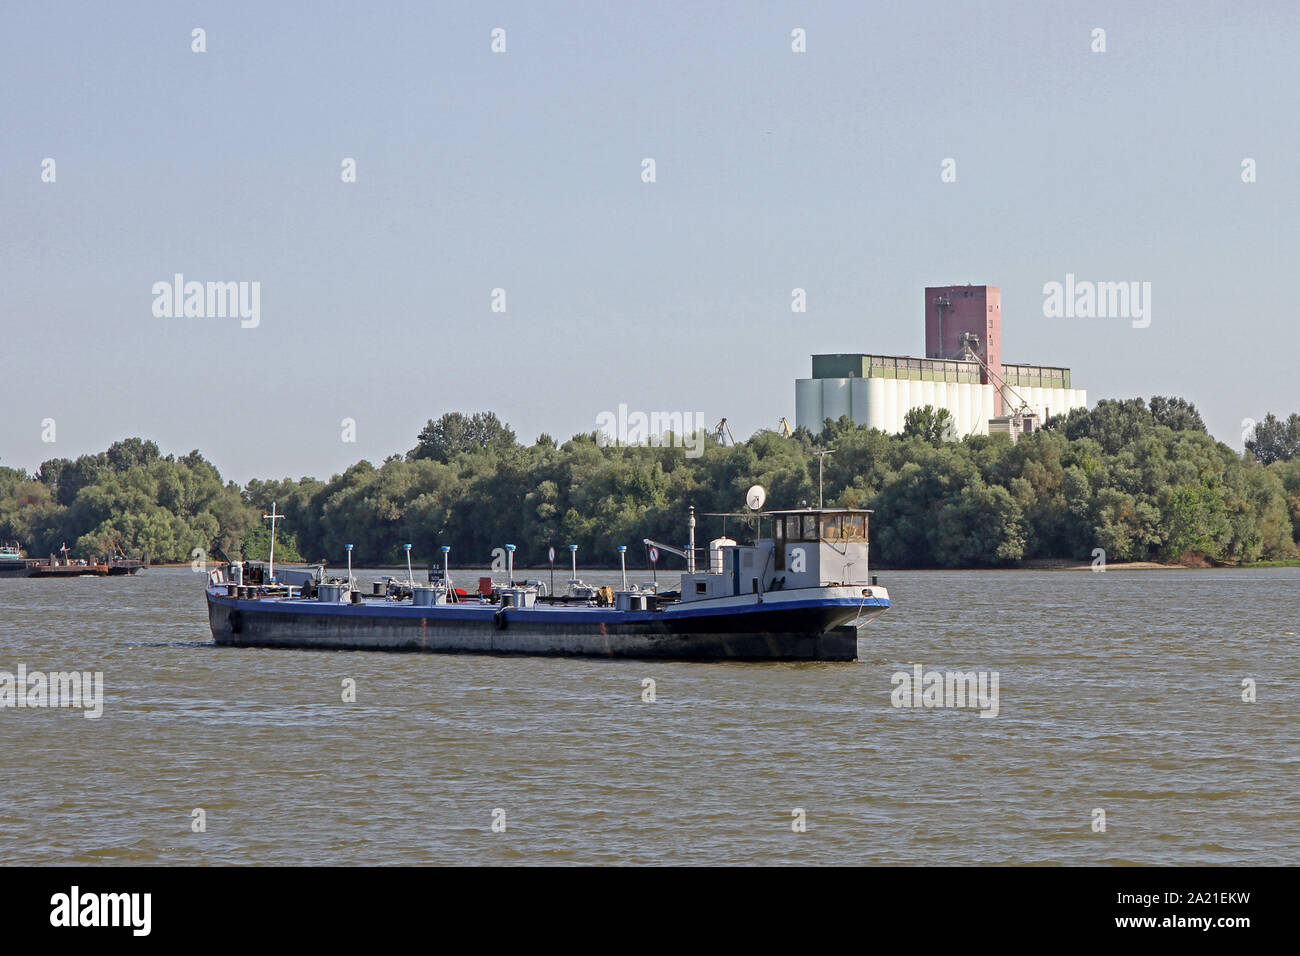 View of tanker on Danube River near Belgrade with trees on shore with grain silos behind it, Danube River, Serbia. Stock Photo